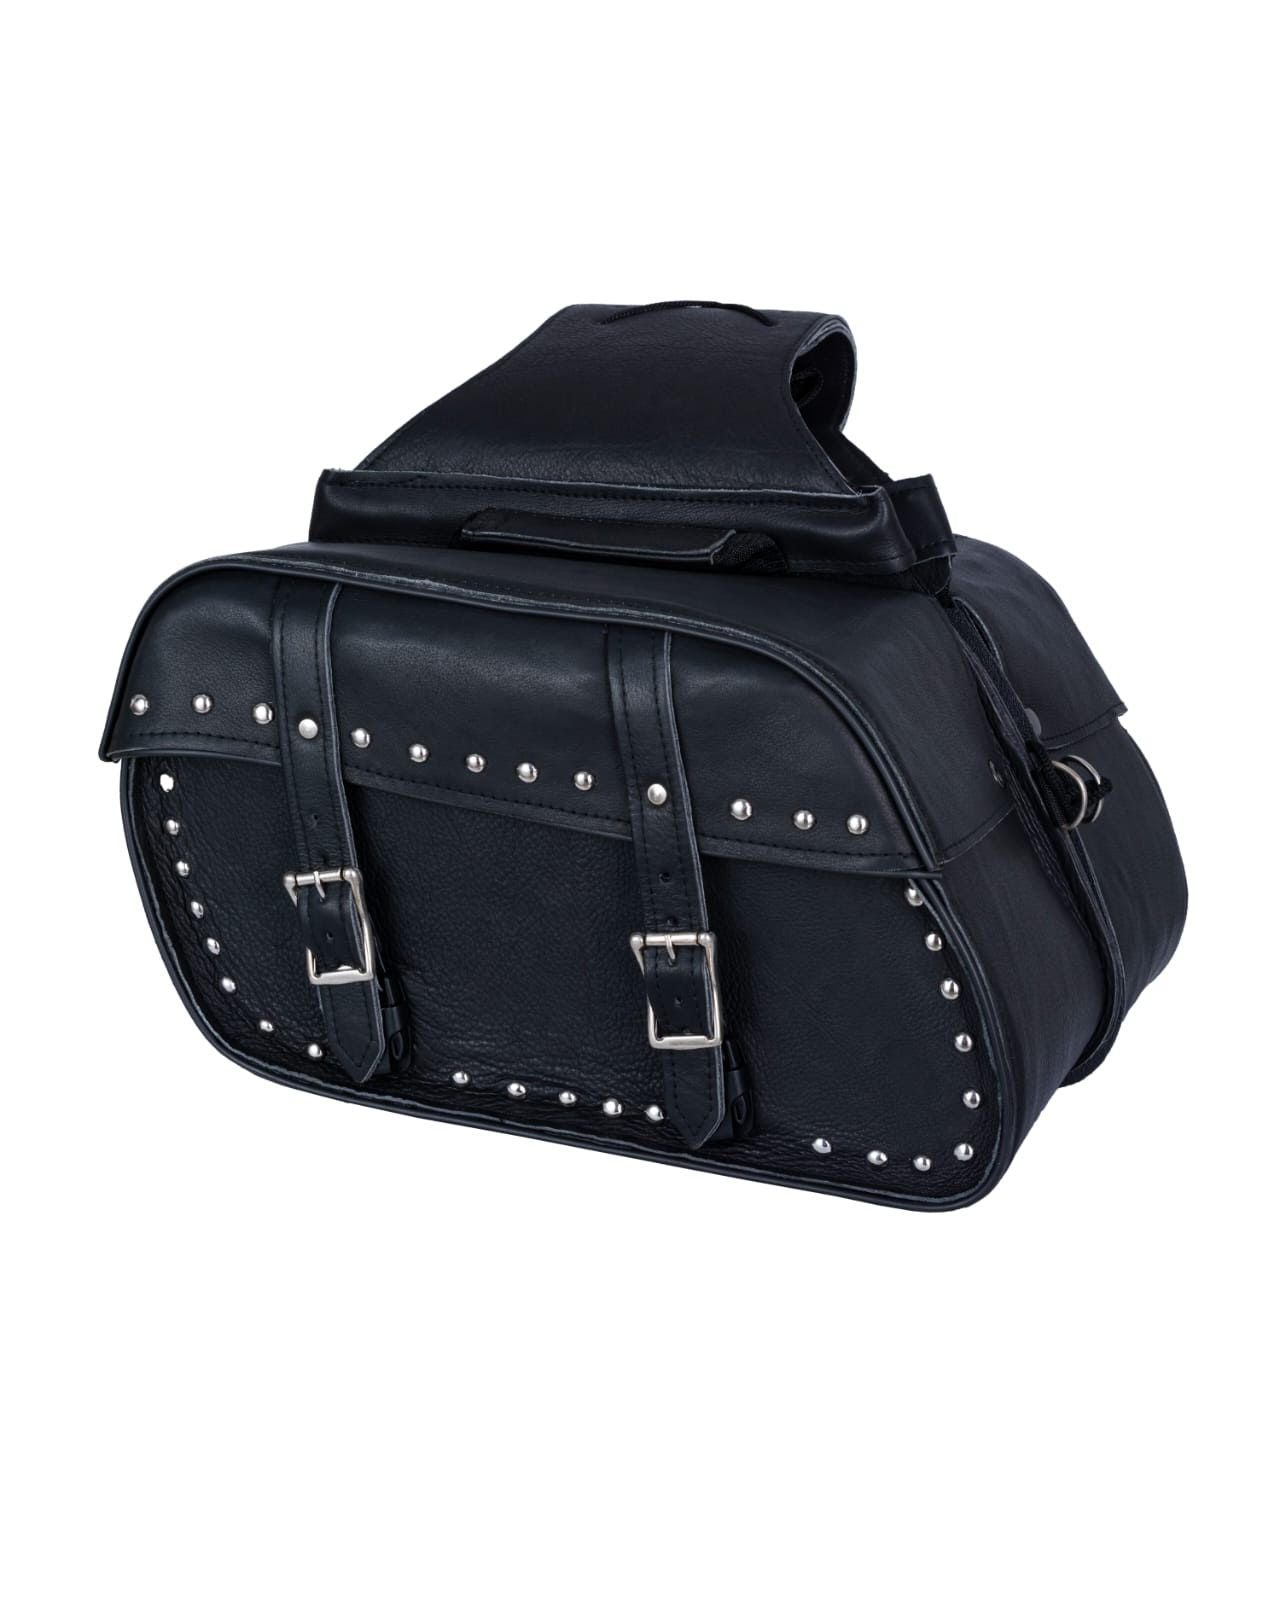 Black Motorcycle Leather Saddlebags with Studs